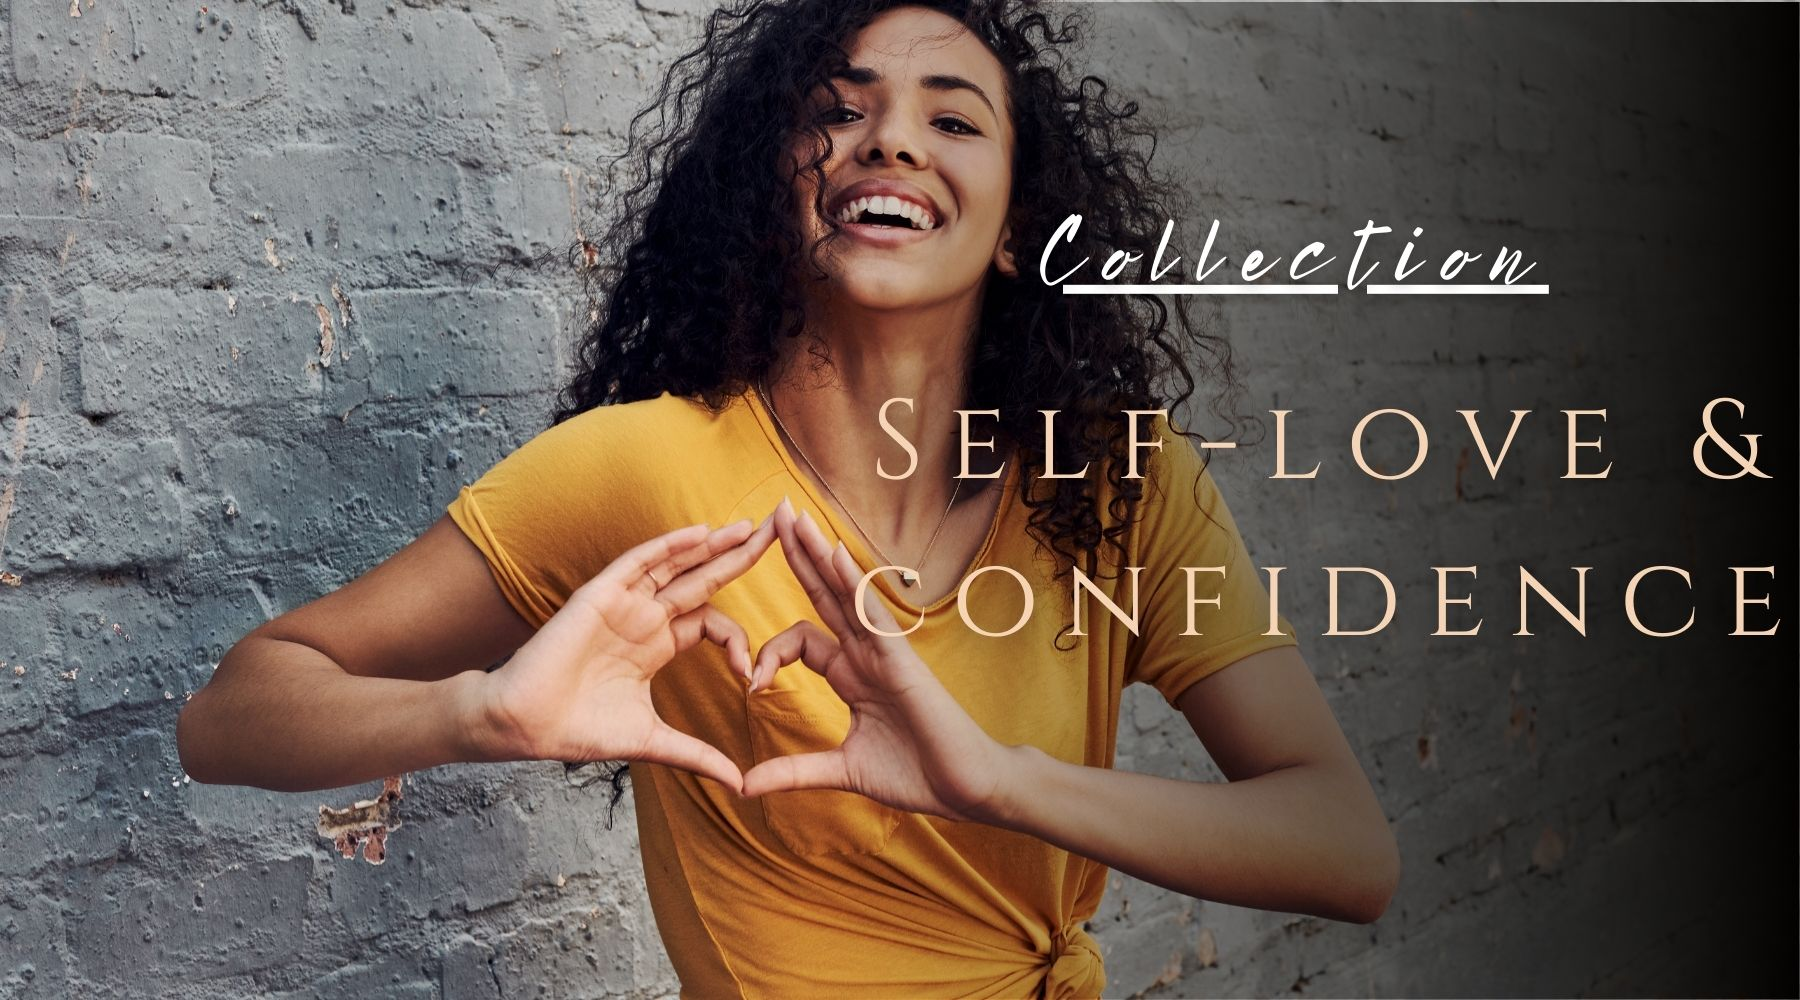 For Self-love &amp; Confidence